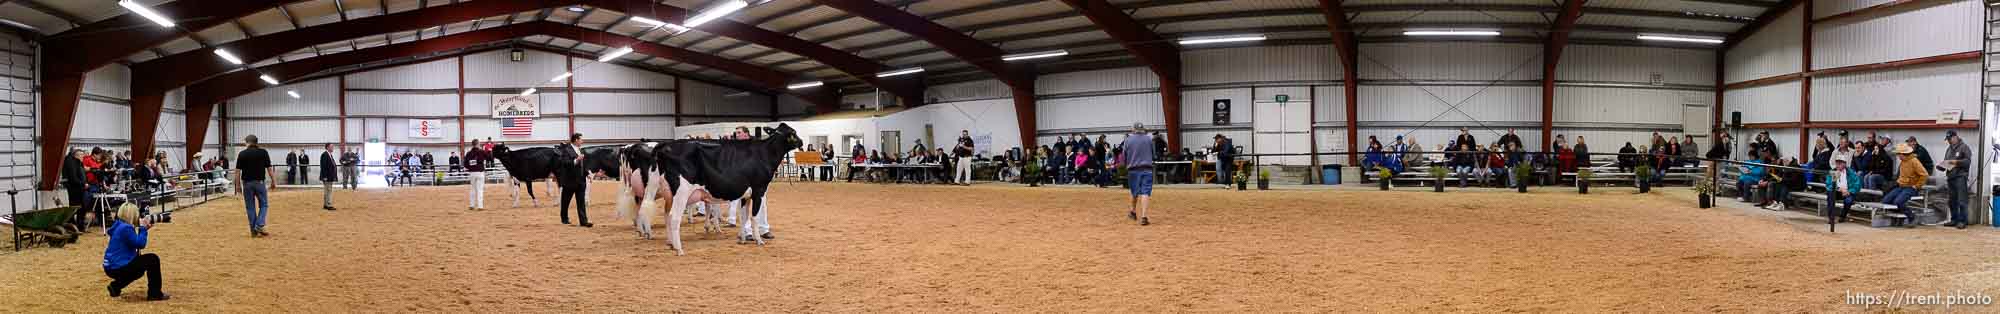 Western Spring National Cow Show